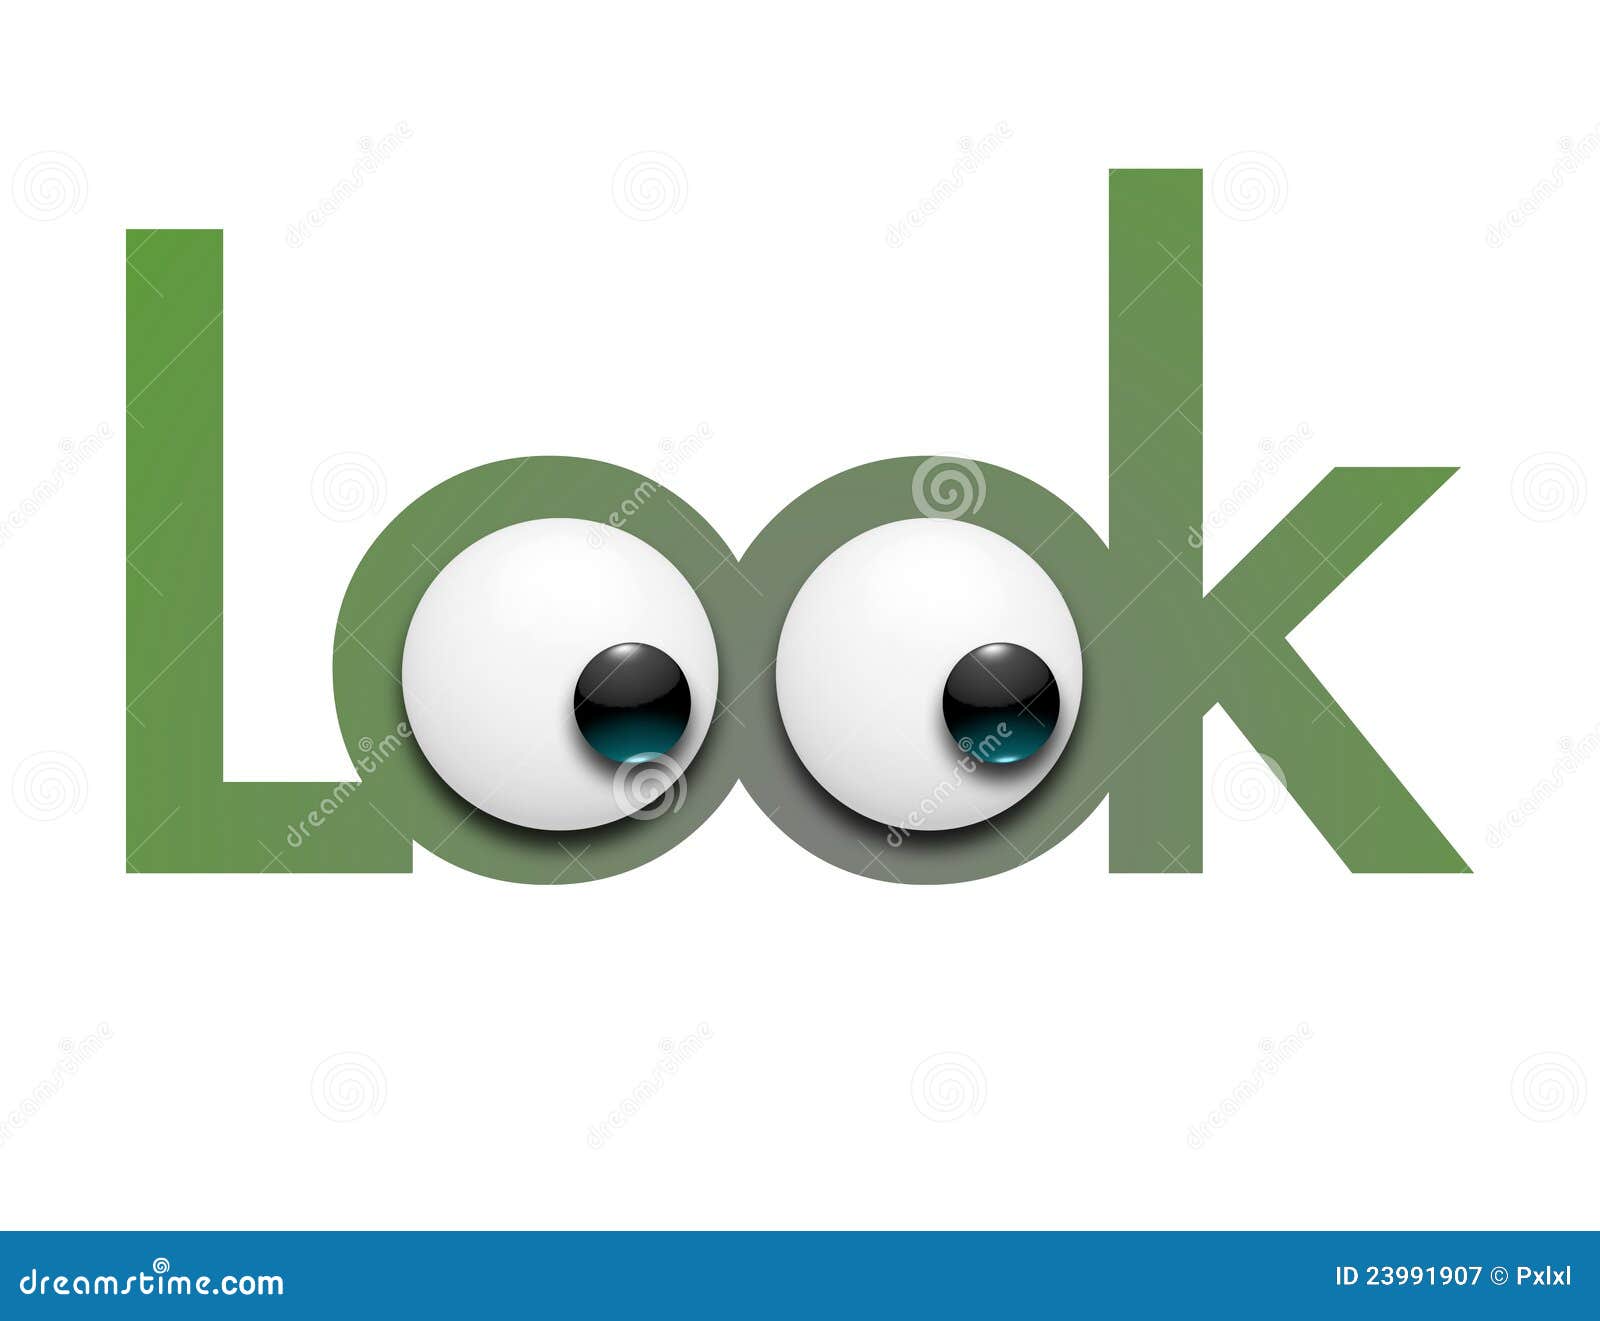 eyes looking clipart - photo #49